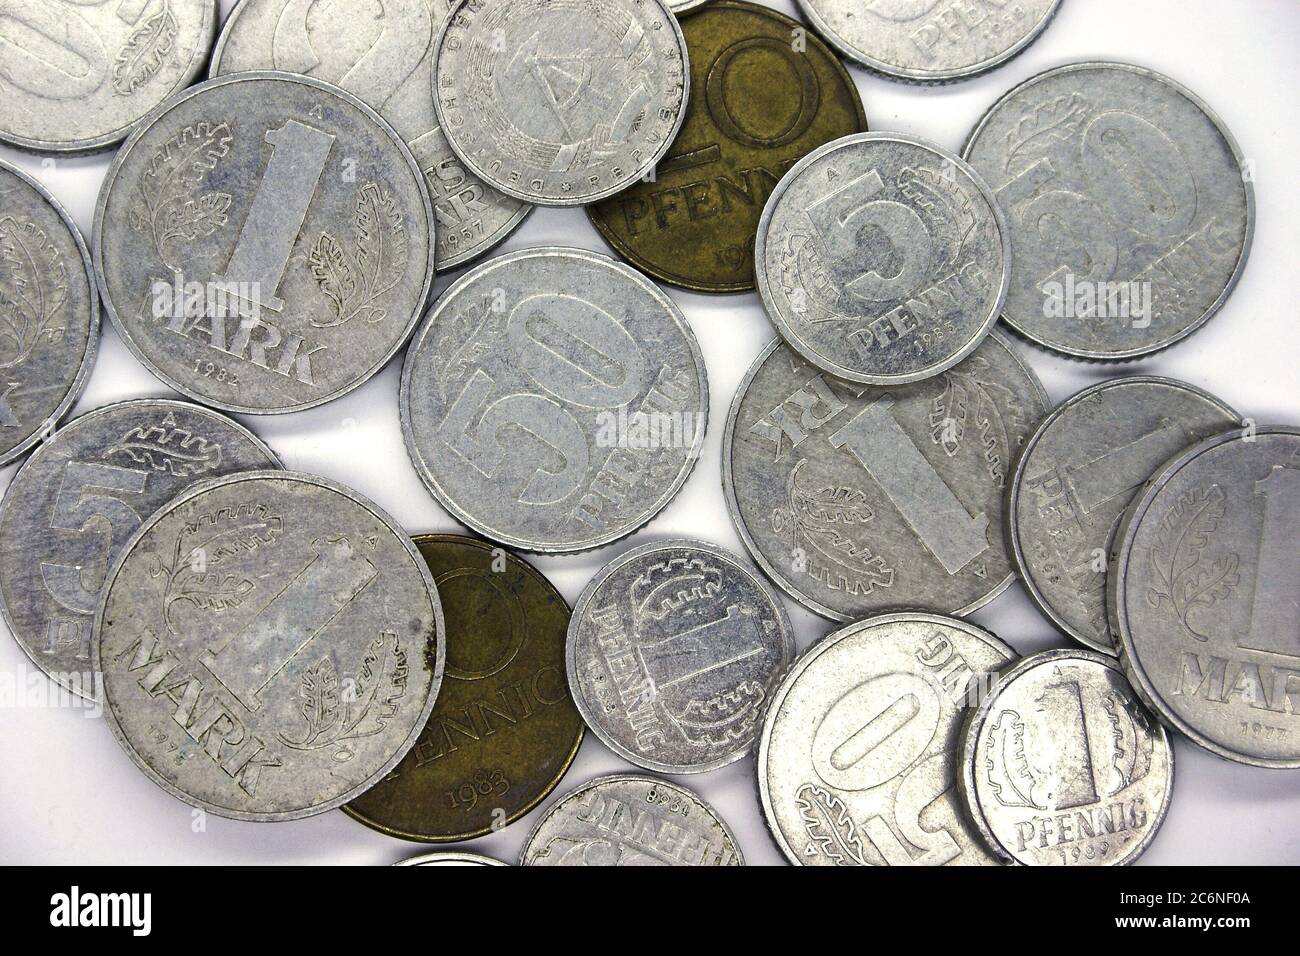 Collection of various old coins of the former German Democratic Republic, GDR, Marks and Pennies Stock Photo